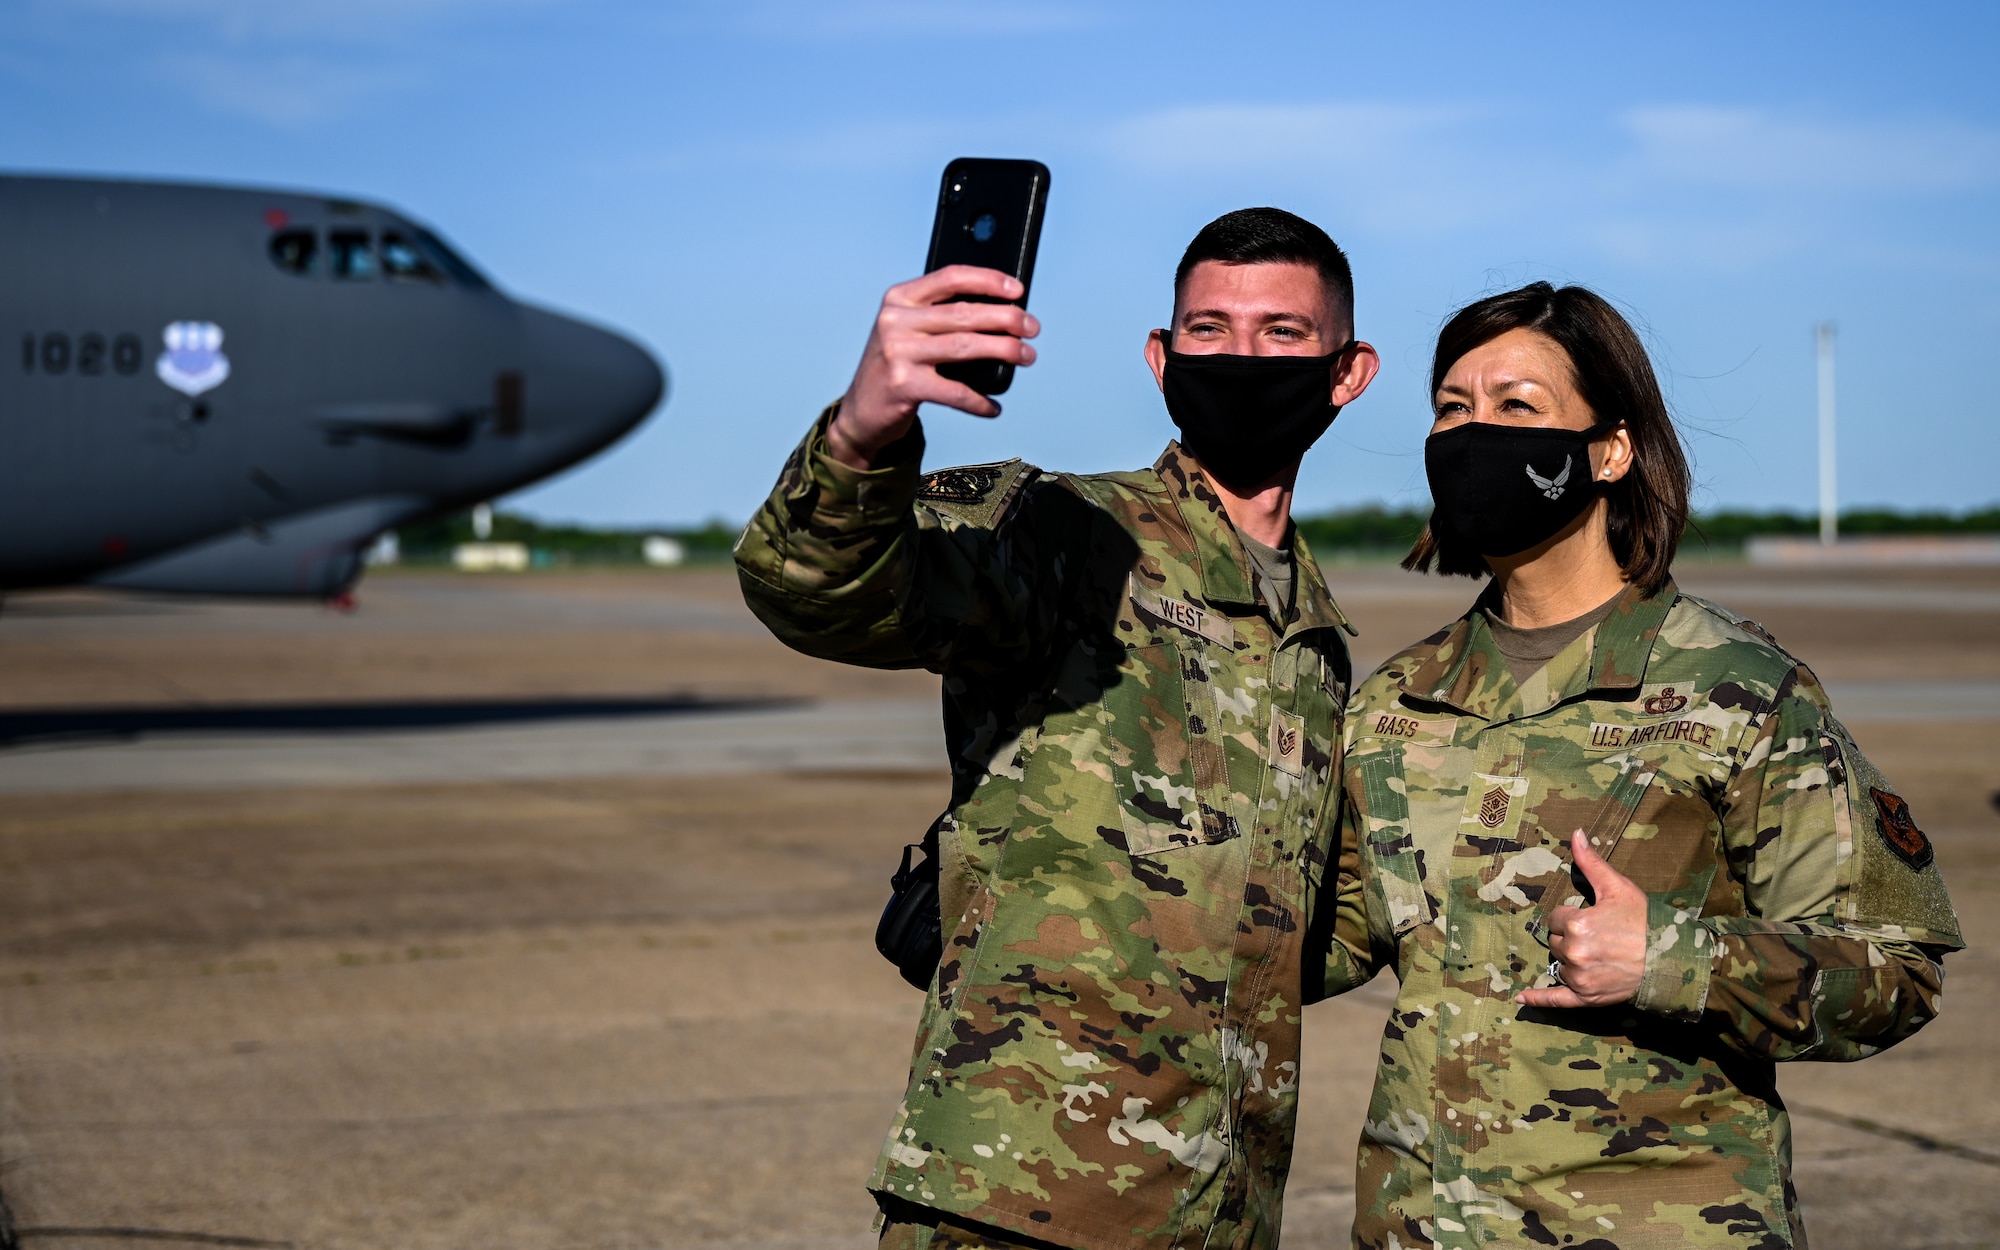 Chief Master Sgt. of the Air Force JoAnne S. Bass and Technical Sgt. Austin West, 2nd Aircraft Maintenance Squadron instrument flight control systems craftsman, pose for a selfie during a tour of Barksdale Air Force Base, Louisiana, April 21, 2021. West was recognized for being a master technician from the 96th Aircraft Maintenance Unit. (U.S. Air Force photo by Senior Airman Christina Graves)